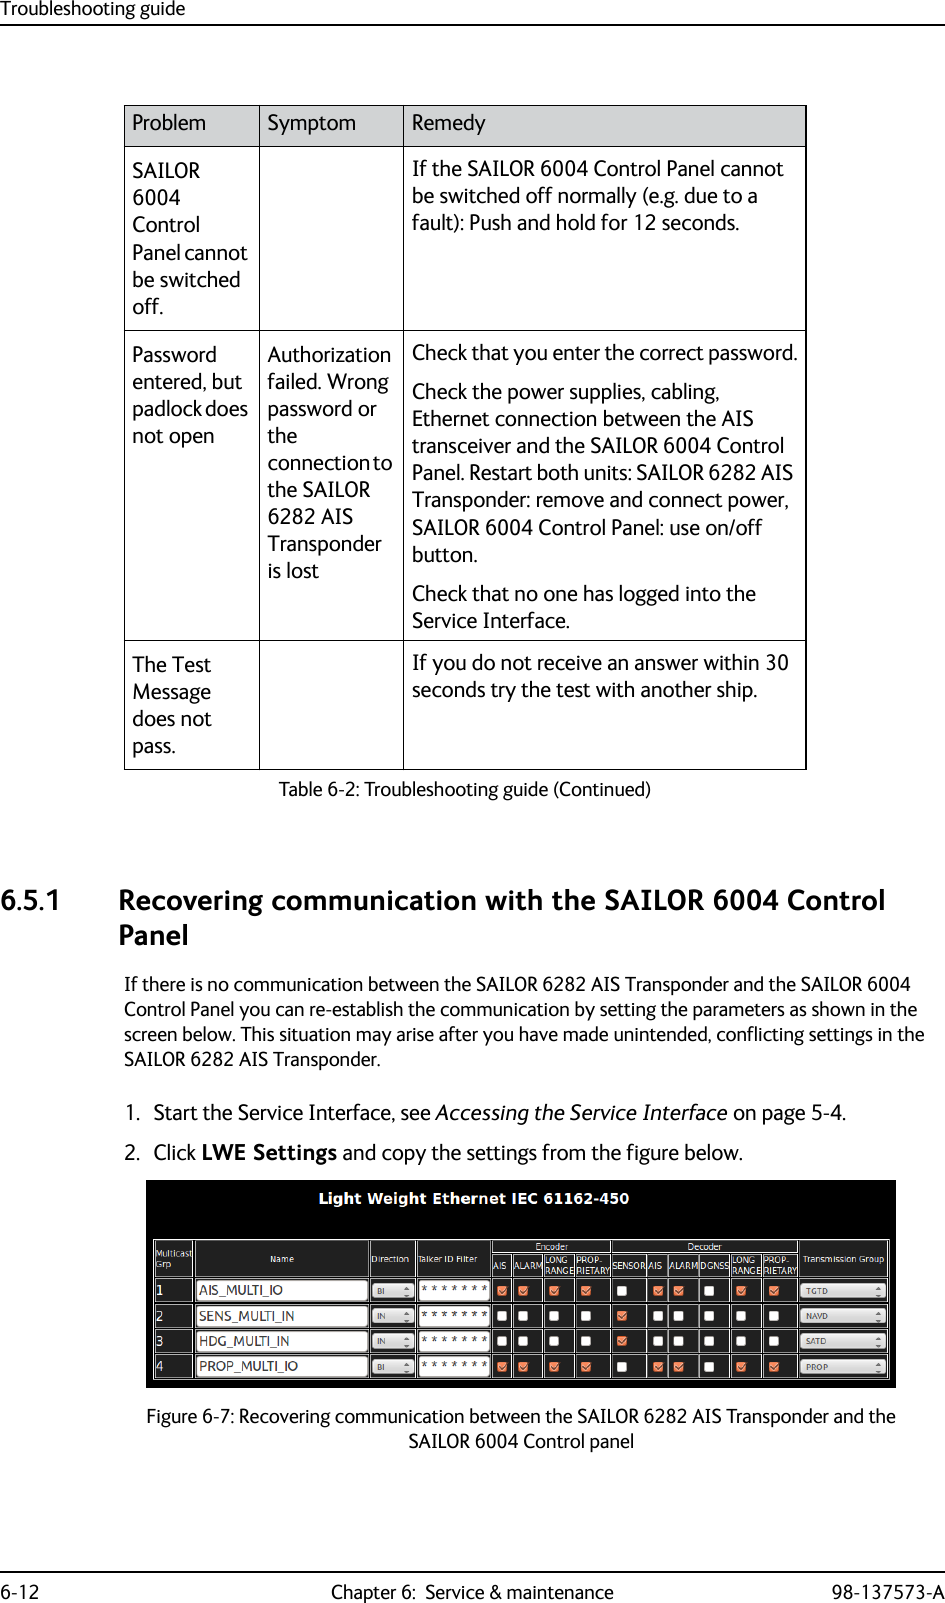 Troubleshooting guide6-12 Chapter 6:  Service &amp; maintenance 98-137573-A 6.5.1 Recovering communication with the SAILOR 6004 Control PanelIf there is no communication between the SAILOR 6282 AIS Transponder and the SAILOR 6004 Control Panel you can re-establish the communication by setting the parameters as shown in the screen below. This situation may arise after you have made unintended, conflicting settings in the SAILOR 6282 AIS Transponder.1. Start the Service Interface, see Accessing the Service Interface on page 5-4.2. Click LWE Settings and copy the settings from the figure below.SAILOR 6004 Control Panel cannot be switched off.If the SAILOR 6004 Control Panel cannot be switched off normally (e.g. due to a fault): Push and hold for 12 seconds.Password entered, but padlock does not openAuthorization failed. Wrong password or the connection to the SAILOR 6282 AIS Transponder is lostCheck that you enter the correct password.Check the power supplies, cabling, Ethernet connection between the AIS transceiver and the SAILOR 6004 Control Panel. Restart both units: SAILOR 6282 AIS Transponder: remove and connect power, SAILOR 6004 Control Panel: use on/off button.Check that no one has logged into the Service Interface.The Test Message does not pass.If you do not receive an answer within 30 seconds try the test with another ship.Problem Symptom RemedyTable 6-2: Troubleshooting guide (Continued)Figure 6-7: Recovering communication between the SAILOR 6282 AIS Transponder and the SAILOR 6004 Control panel